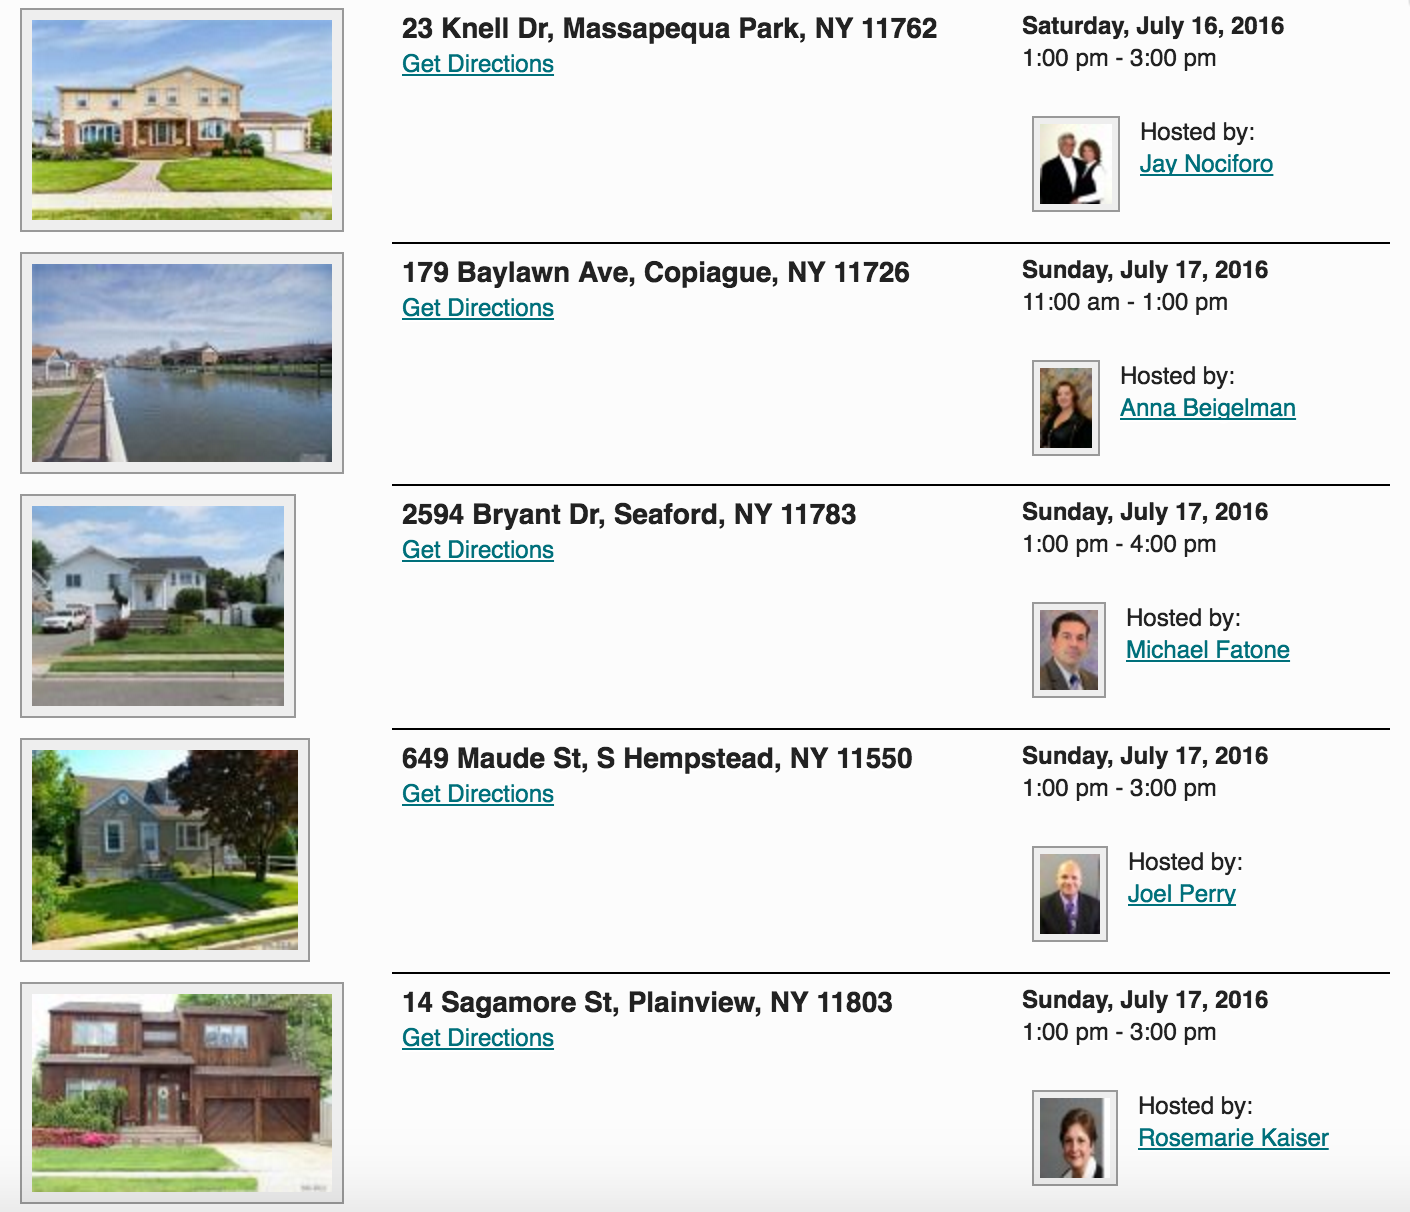 Open Houses This Weekend in Massapequa Park! 7/16 & 7/17